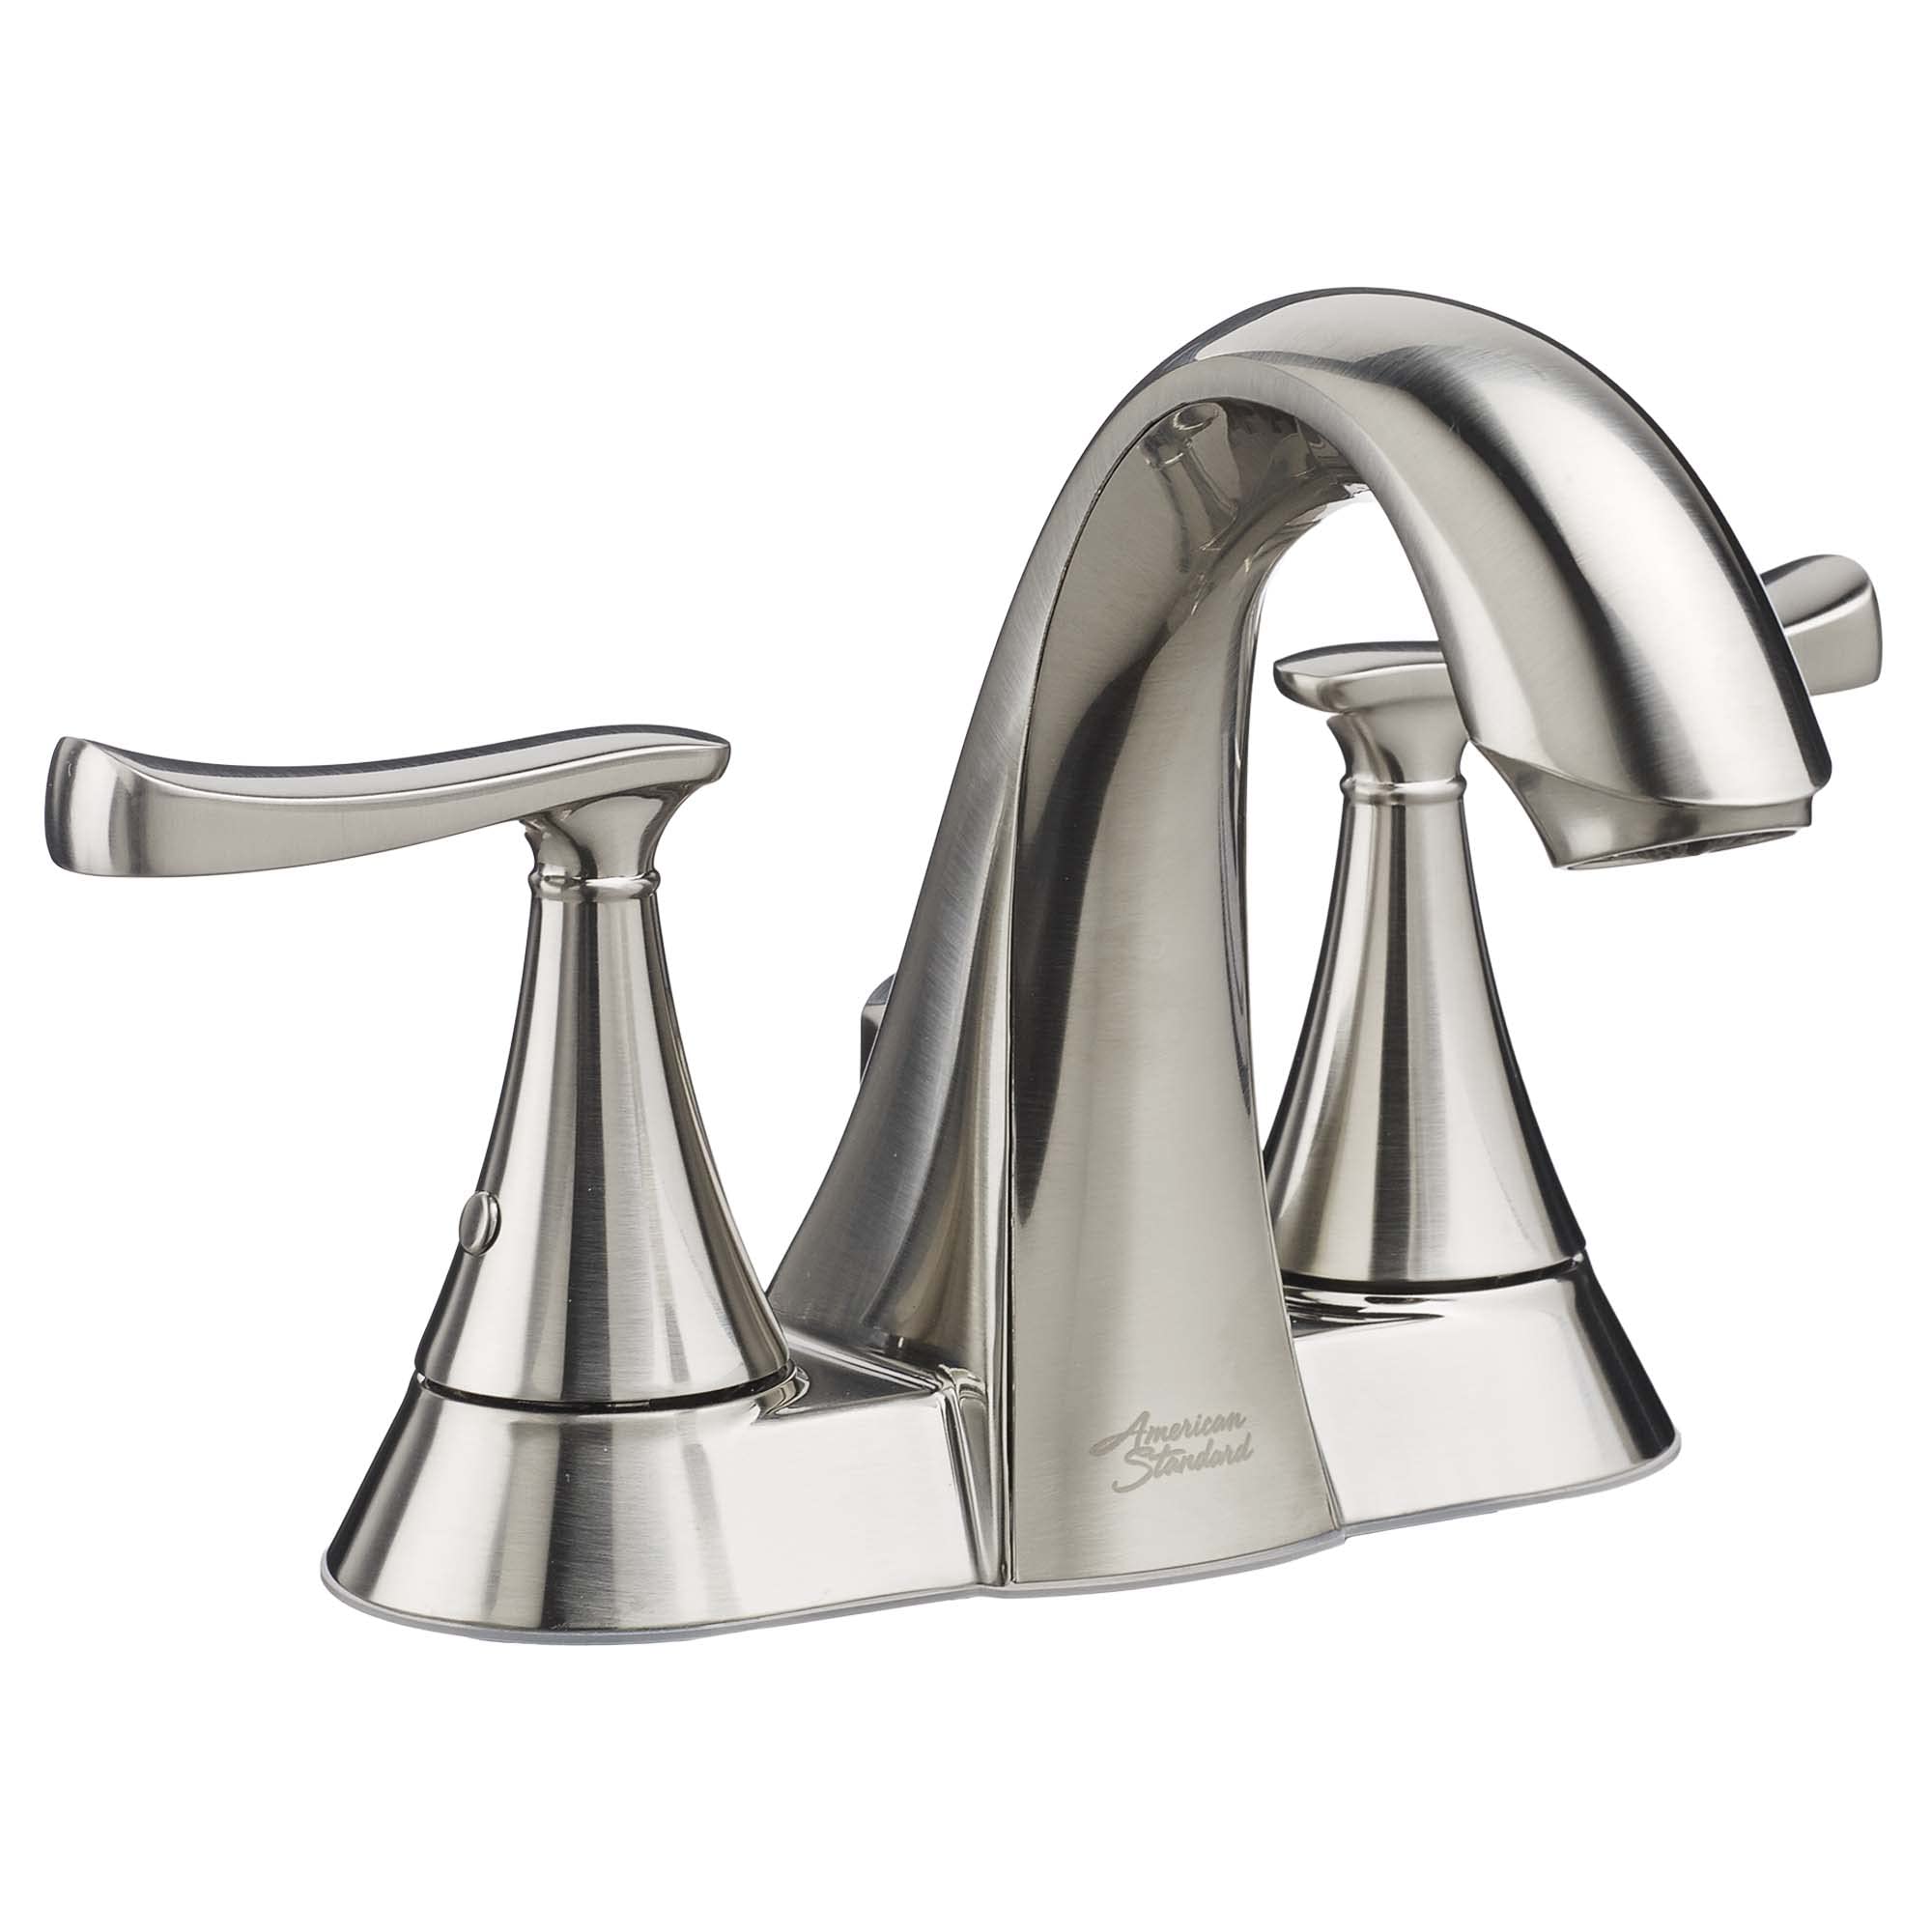 American Standard 7413201.295 Chatfield 1.2 GPM 2-Handle Centerset Bathroom Faucet, Brushed Nickel